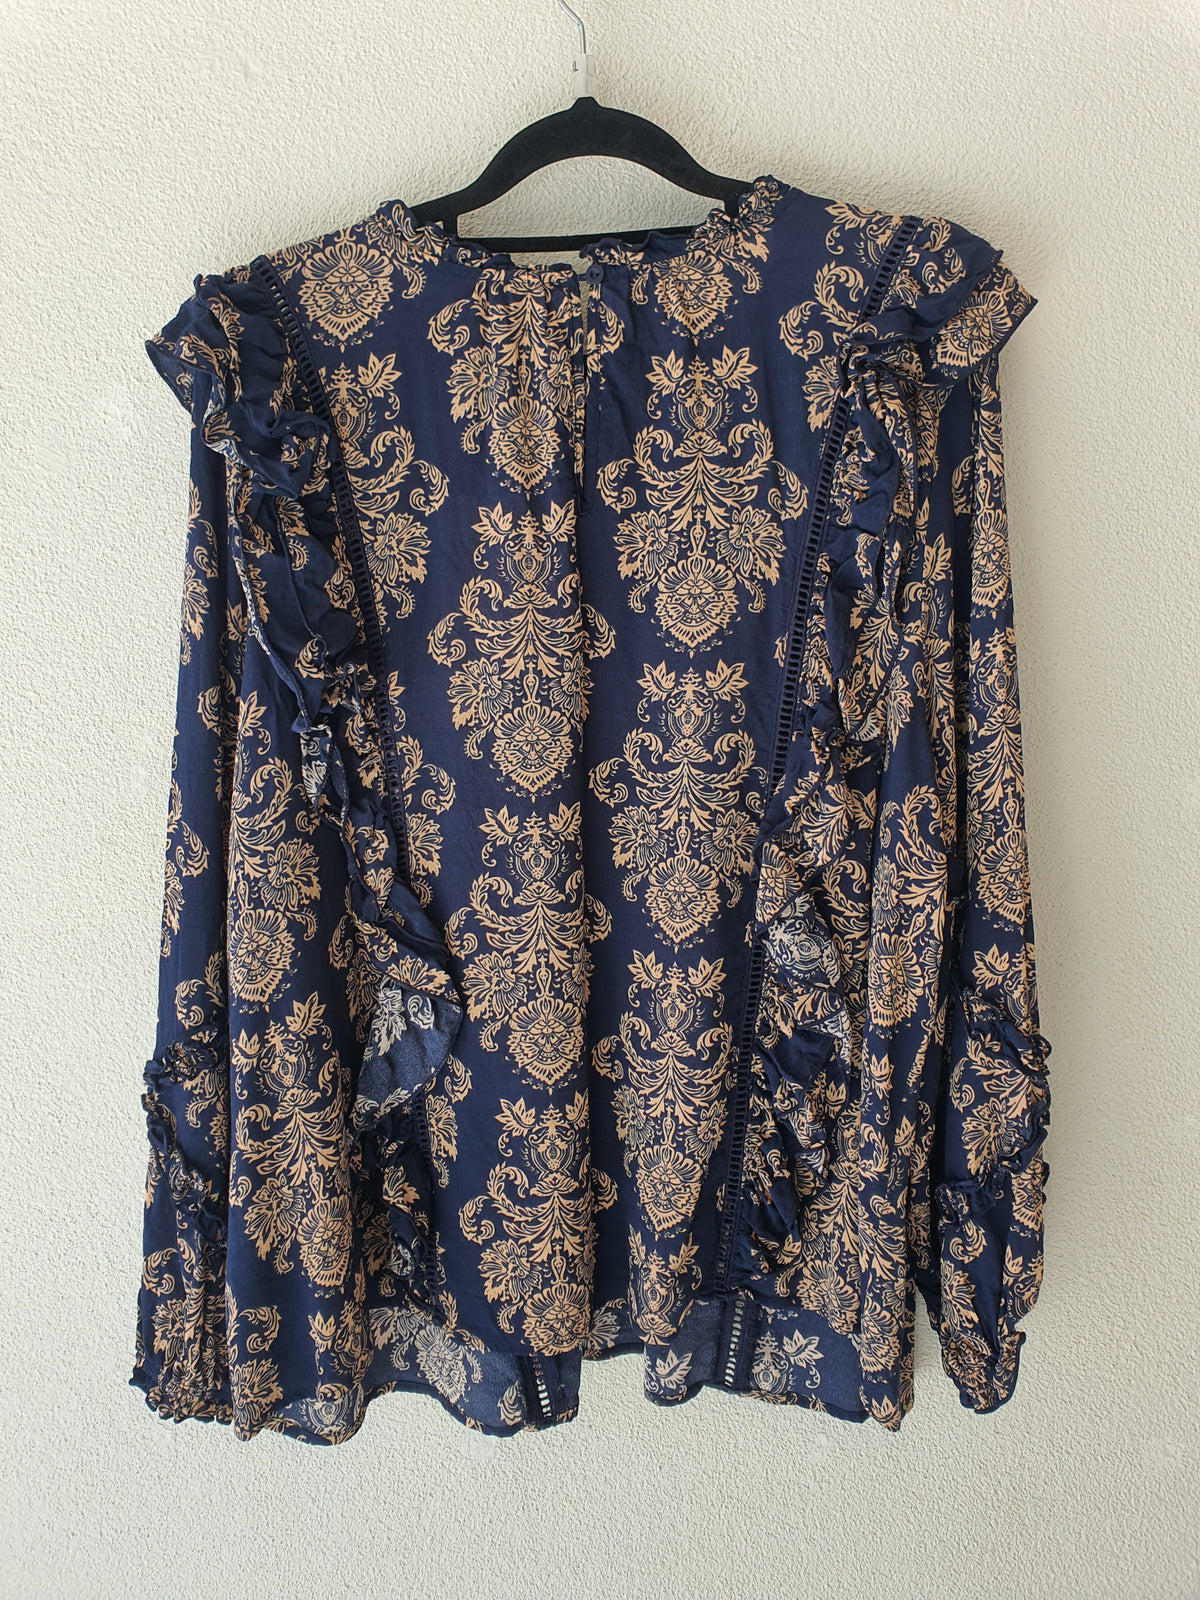 Wild Child Blue and Tan print Top 18